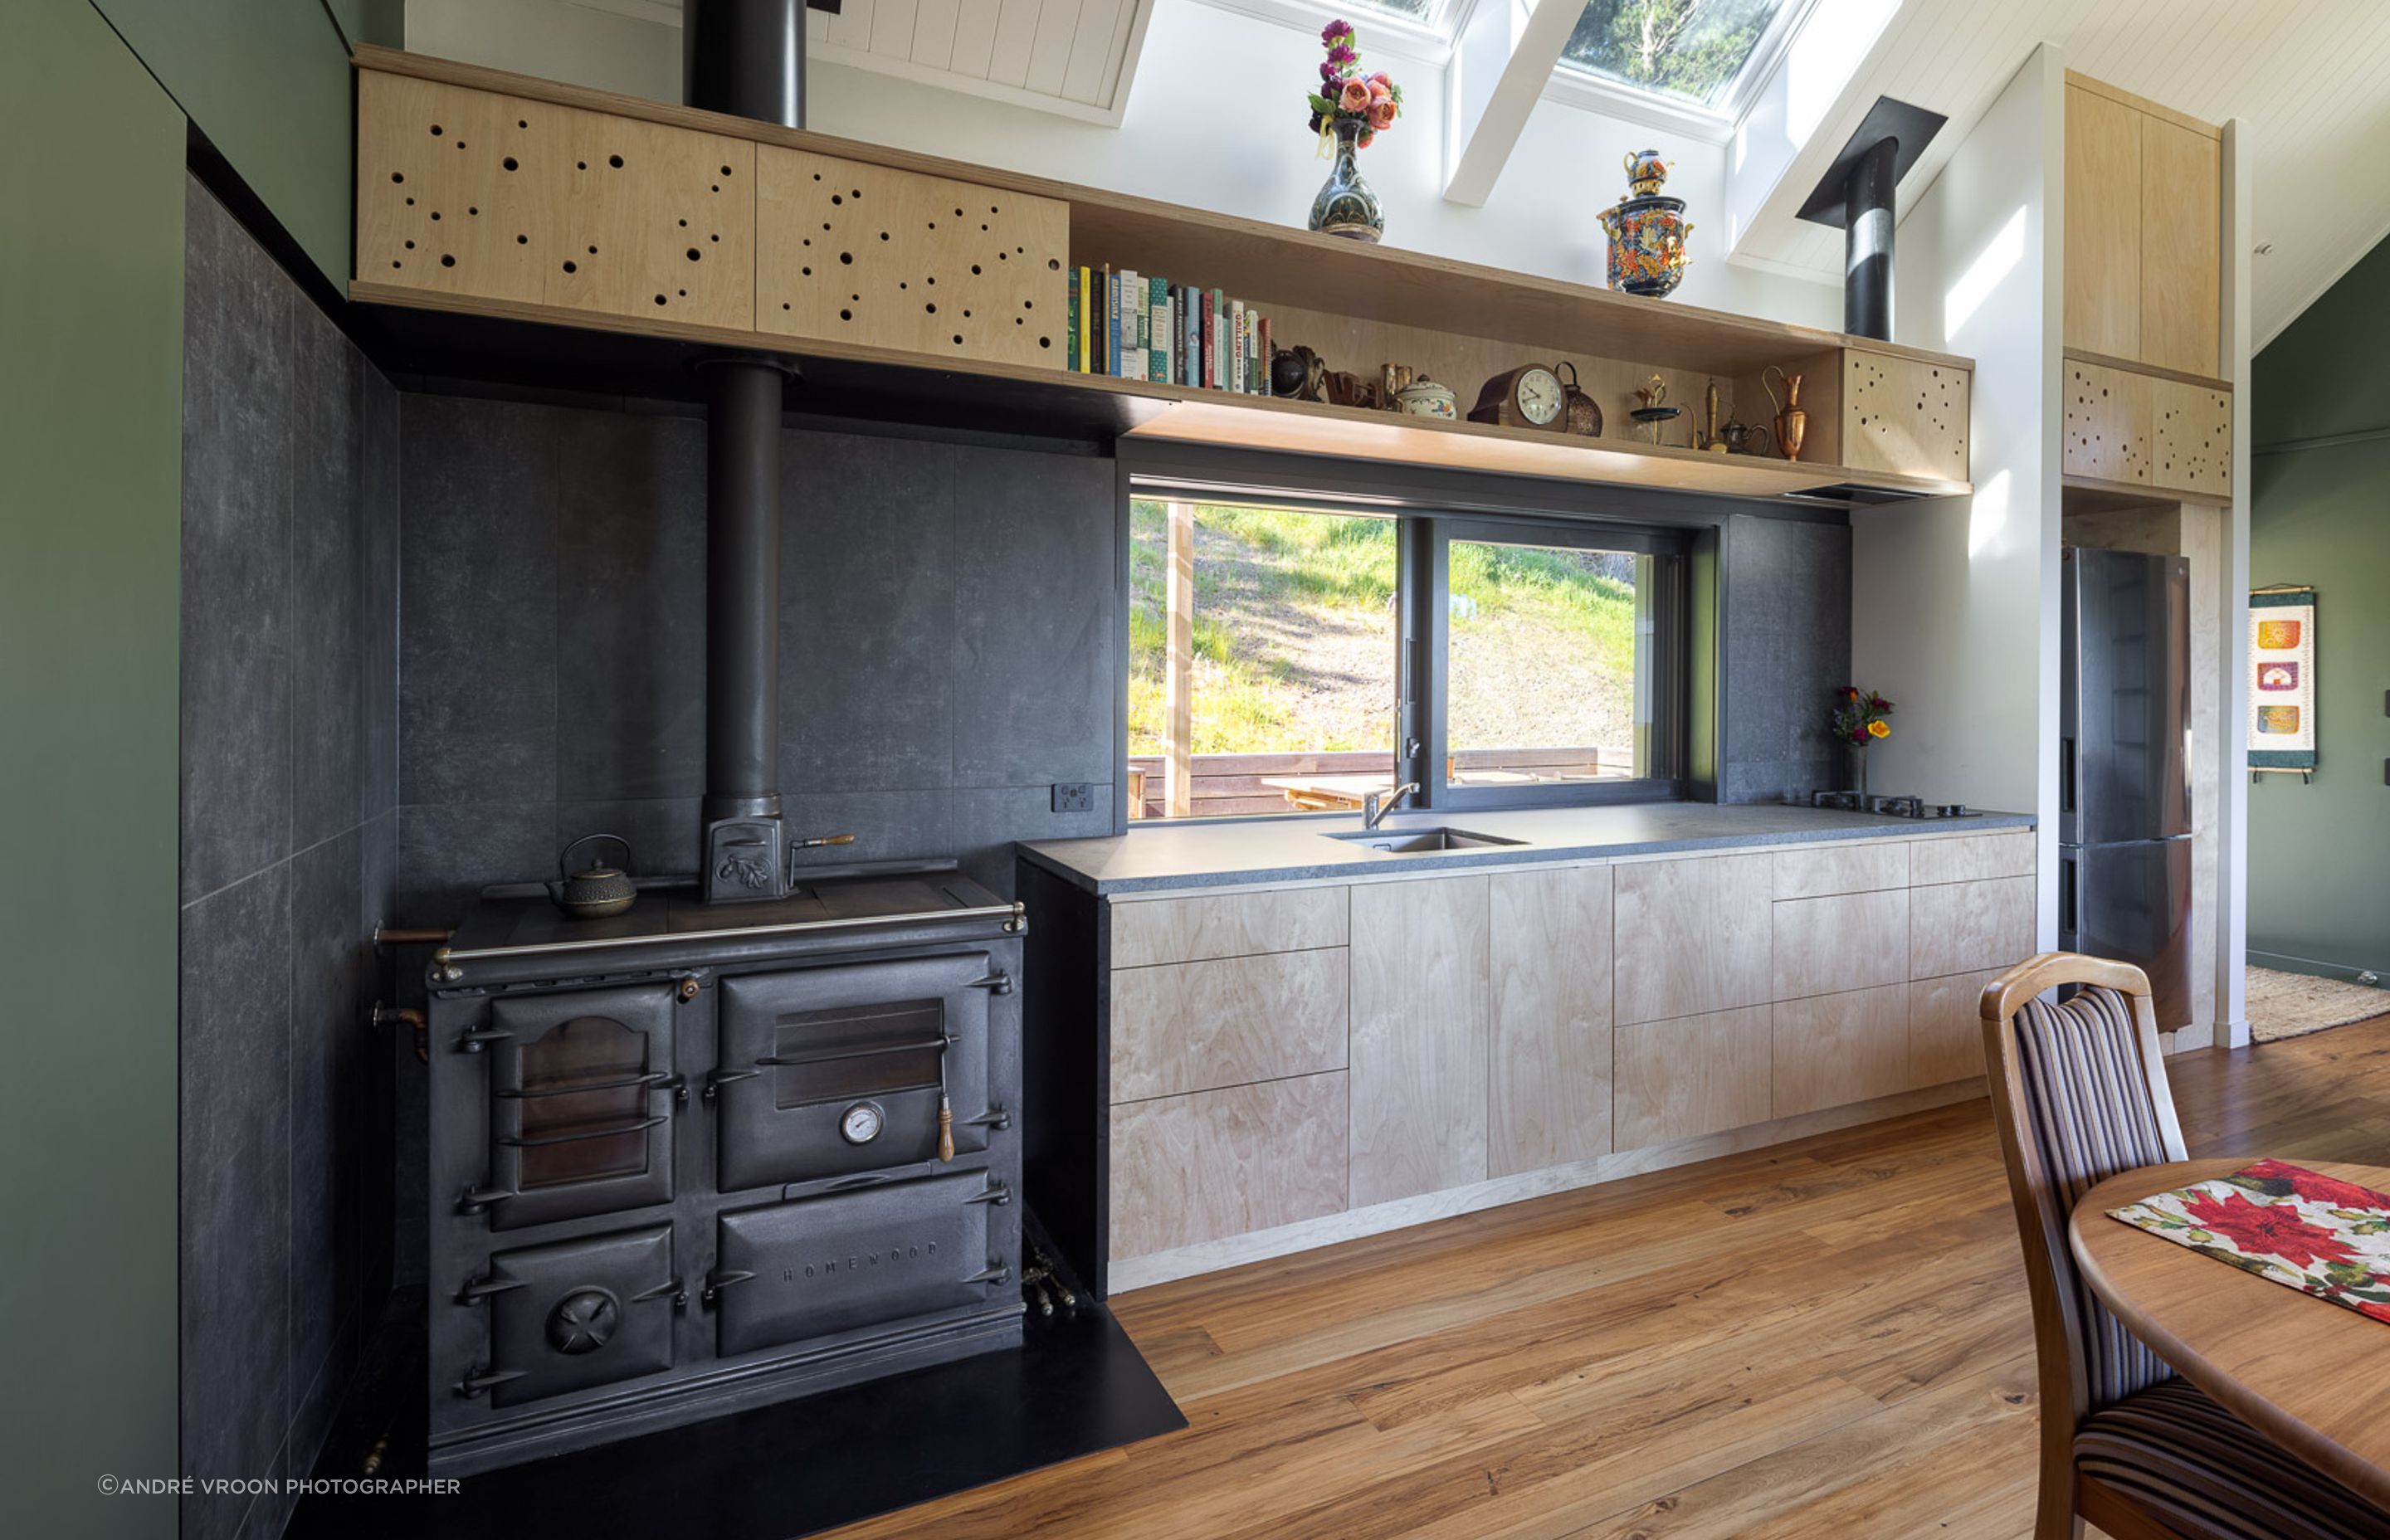 A modest footprint of 75sqm keeps the dwelling compact, with two loft areas extending the usable space. At the heart of the home is the kitchen.